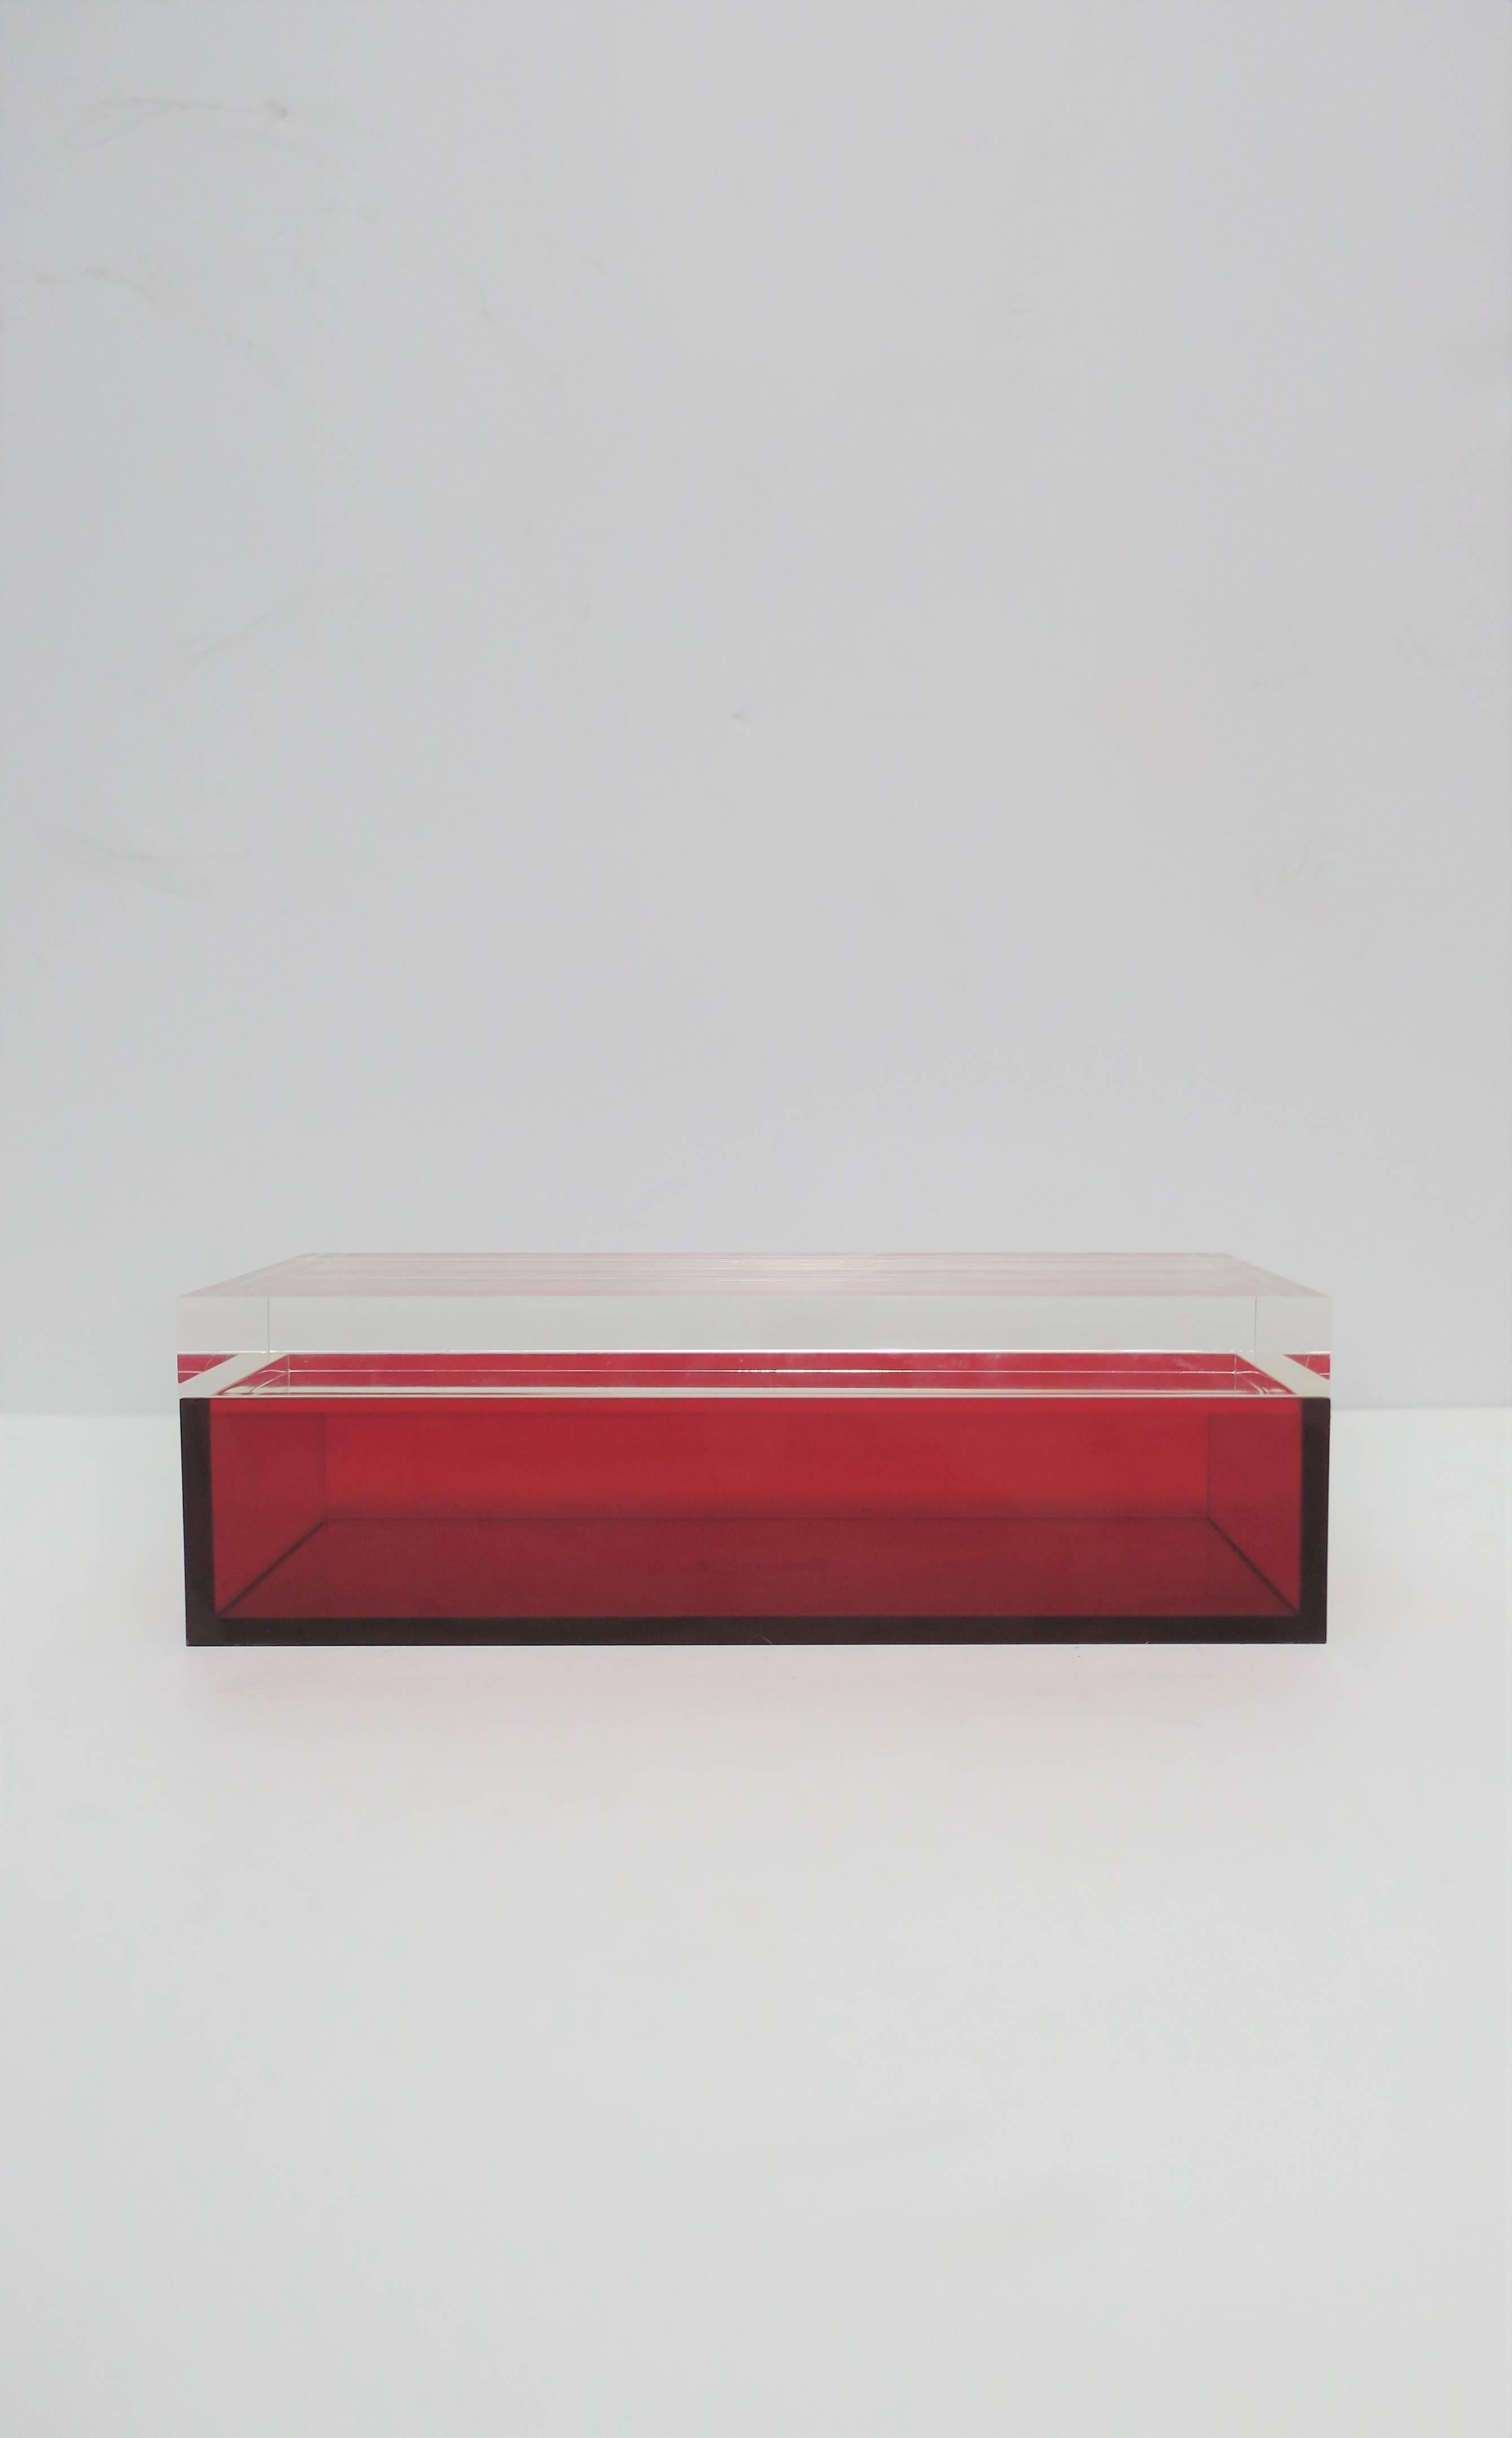 An Italian Postmodern, Modern or Minimalist style, rectangular box by designer Alessandro Albrizzi, Italy, 2005. Box is a translucent red acrylic and a thick clear Lucite top. Designer's mark 